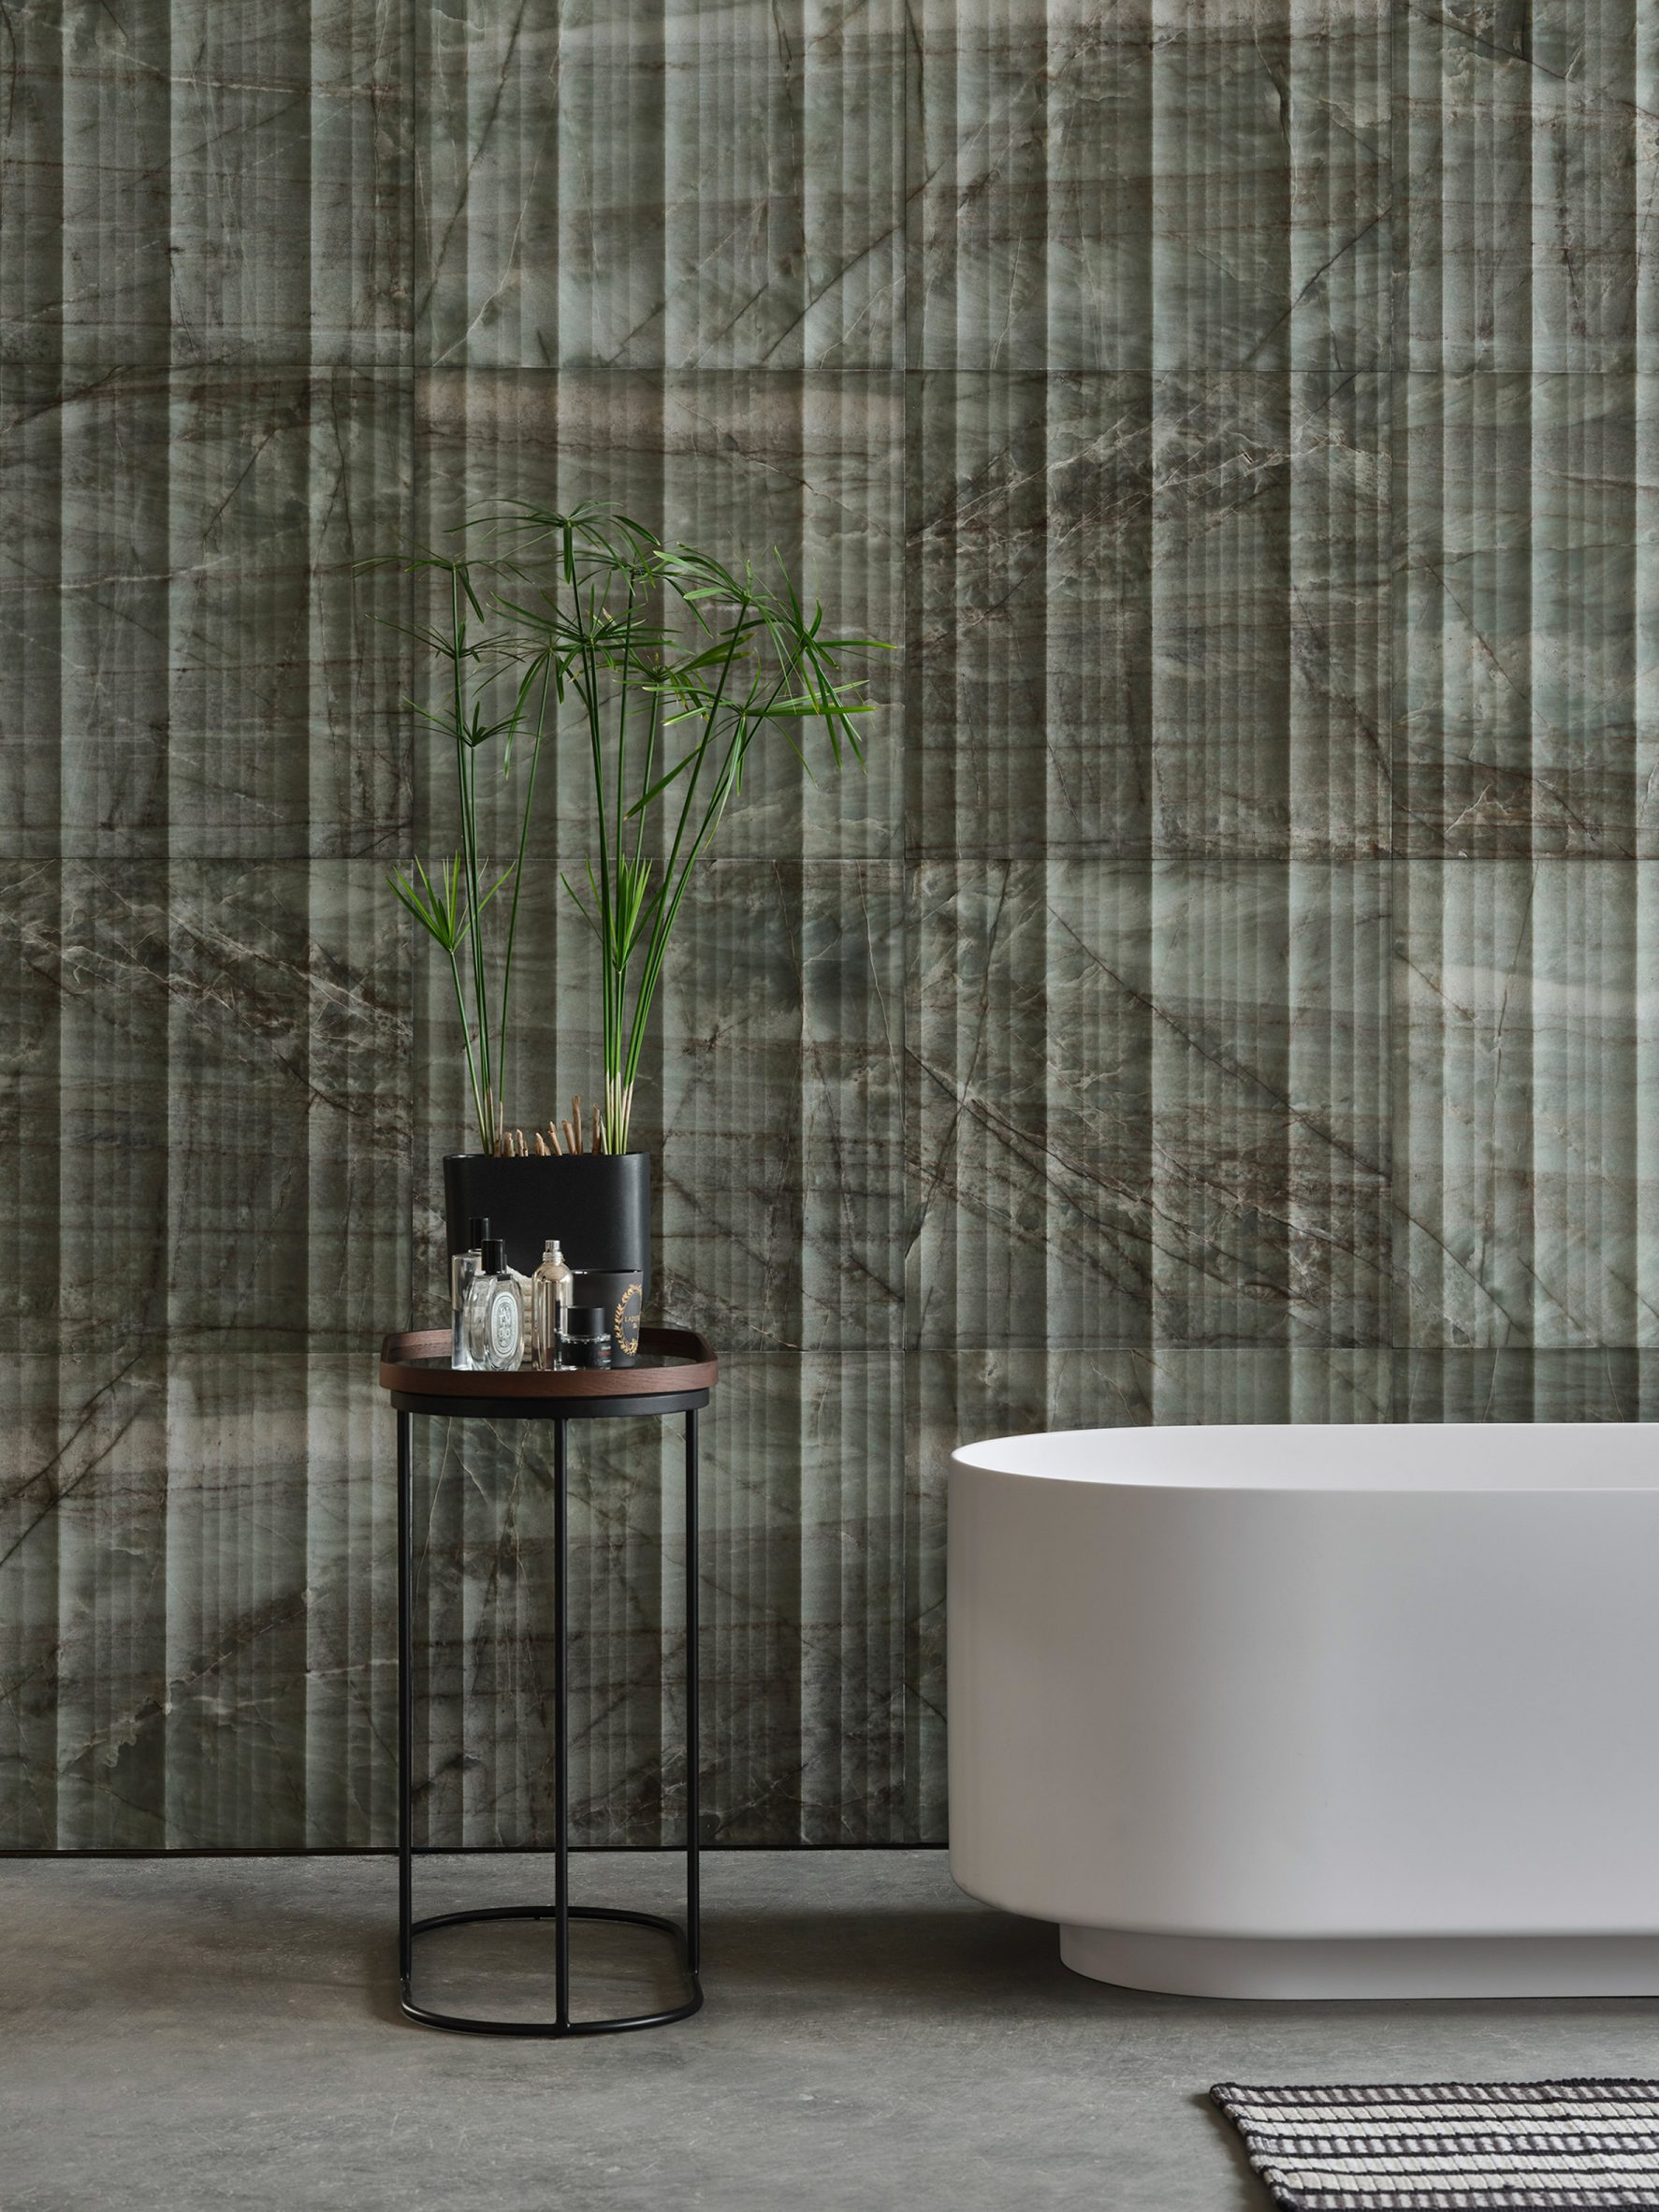 Plissé wall cover made from marble